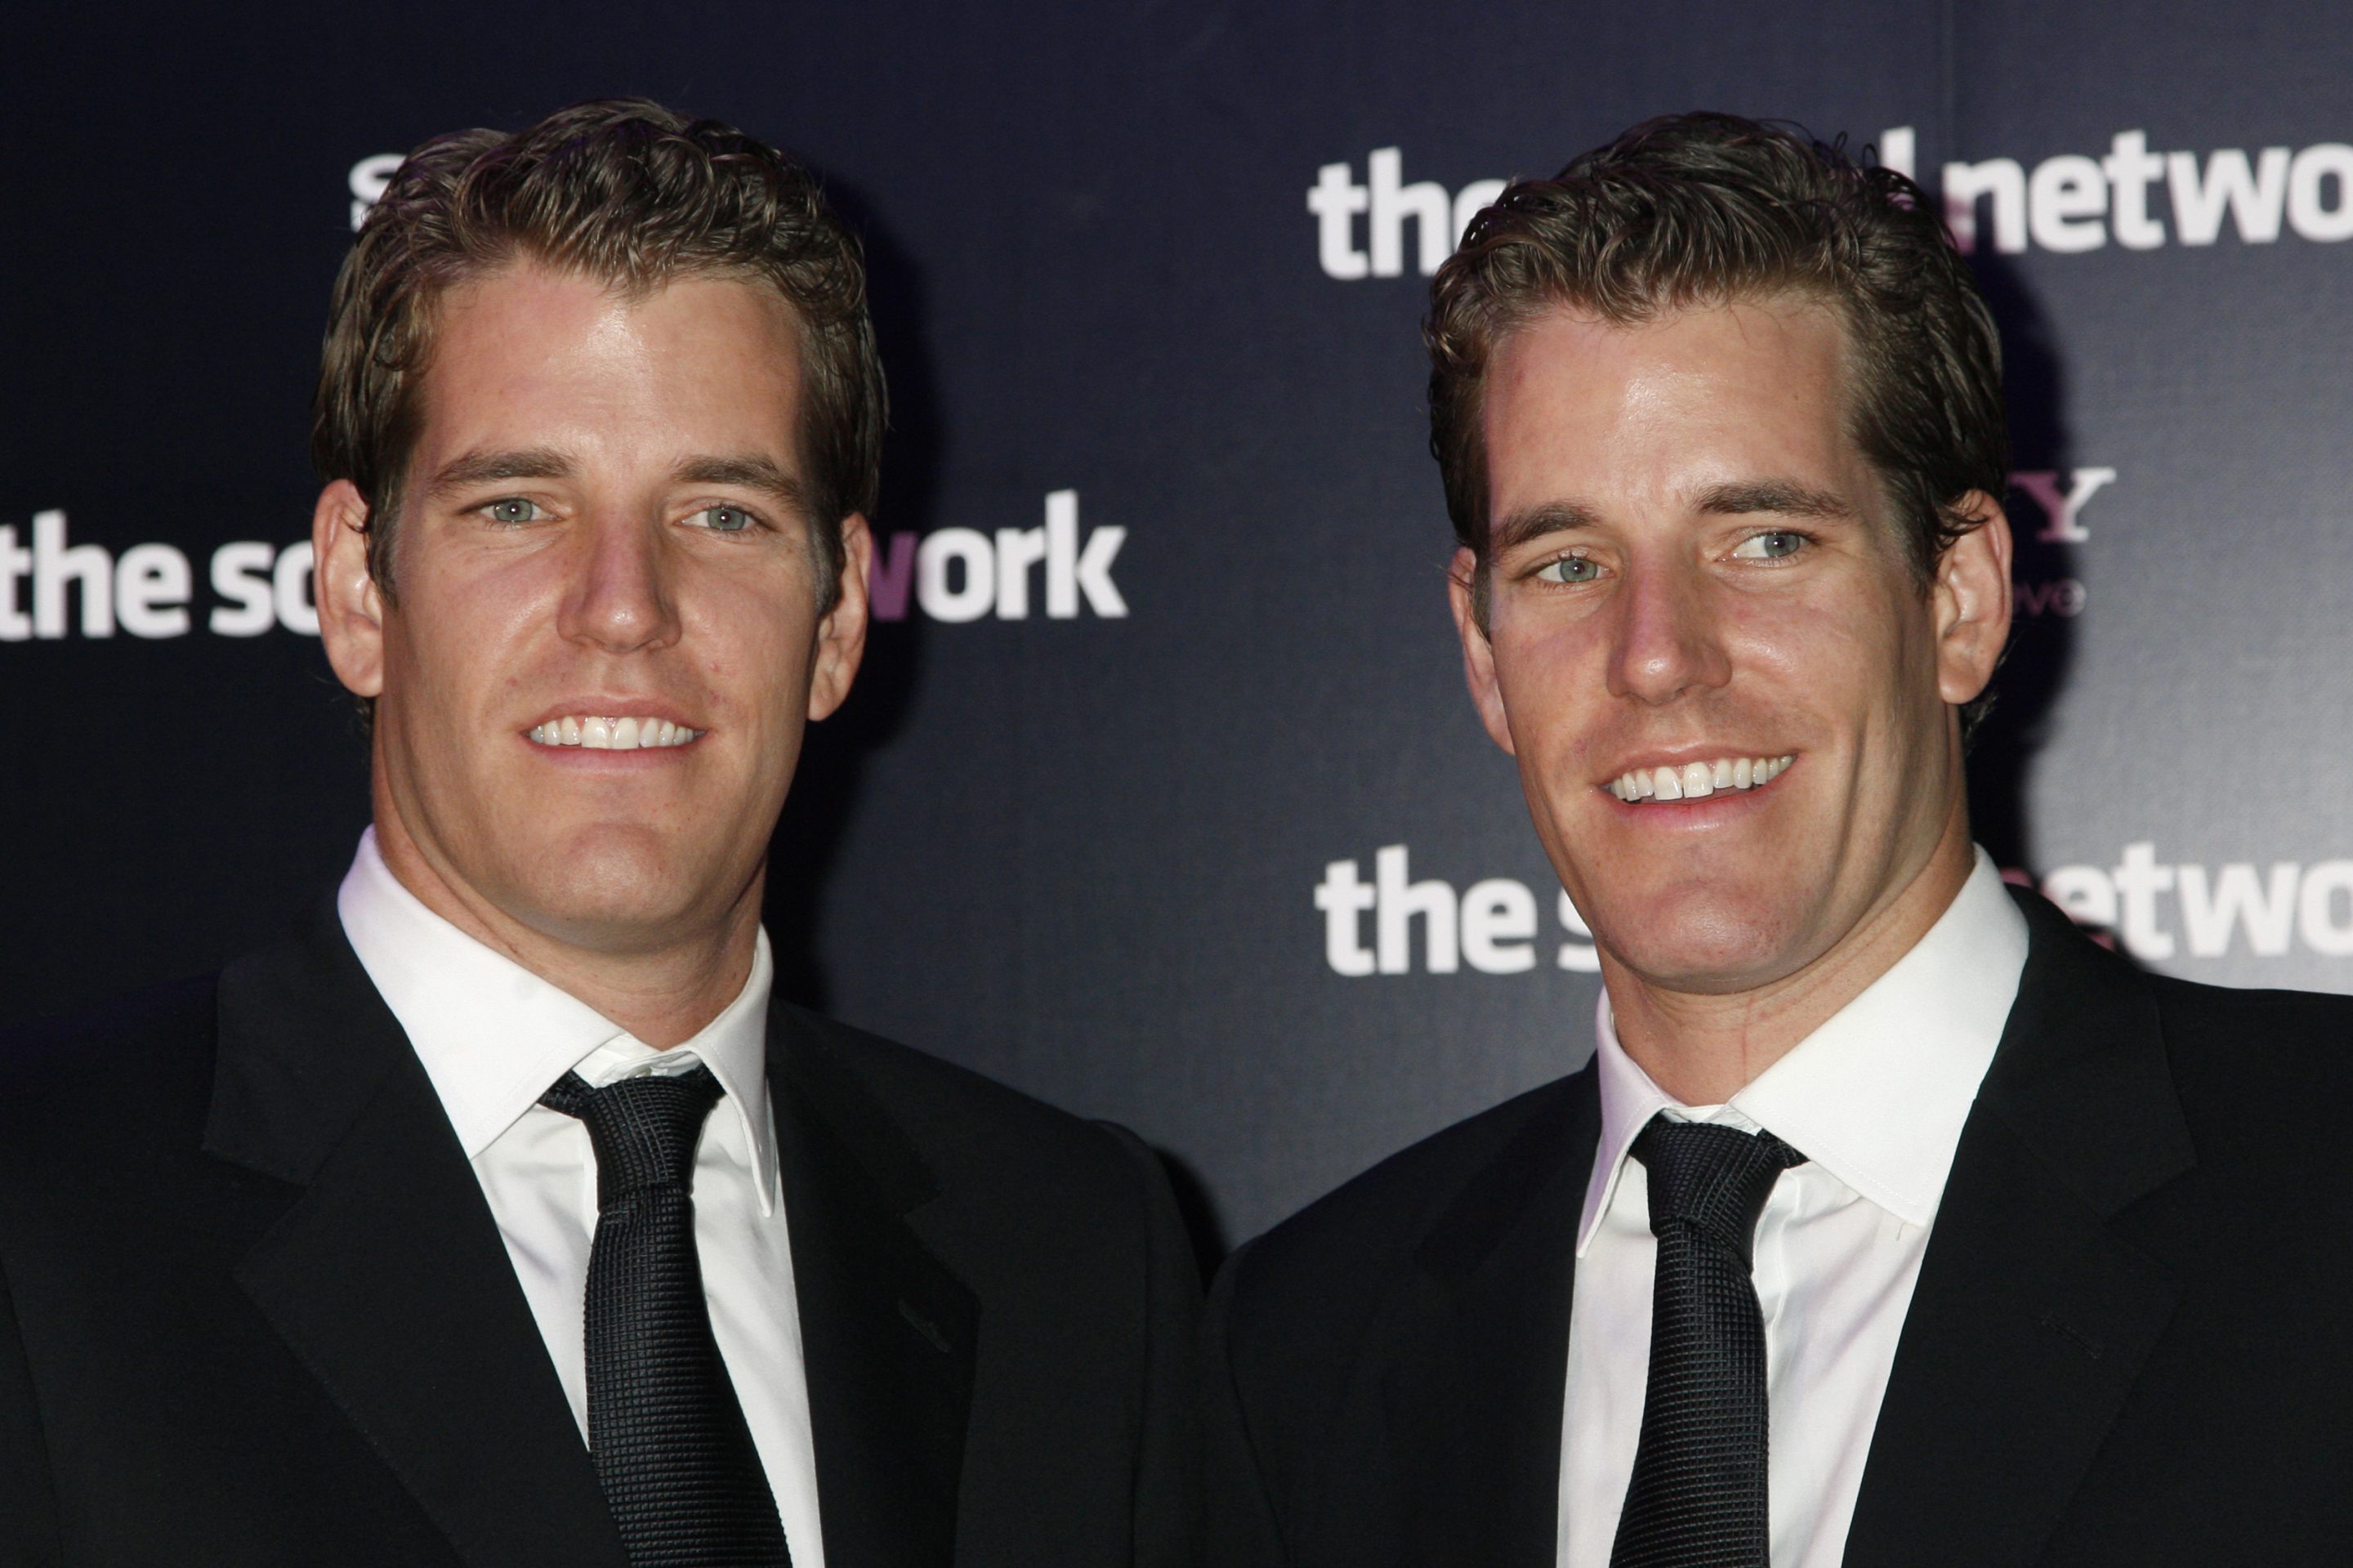 Winklevoss Twins Are Bitcoin's First Billionaires